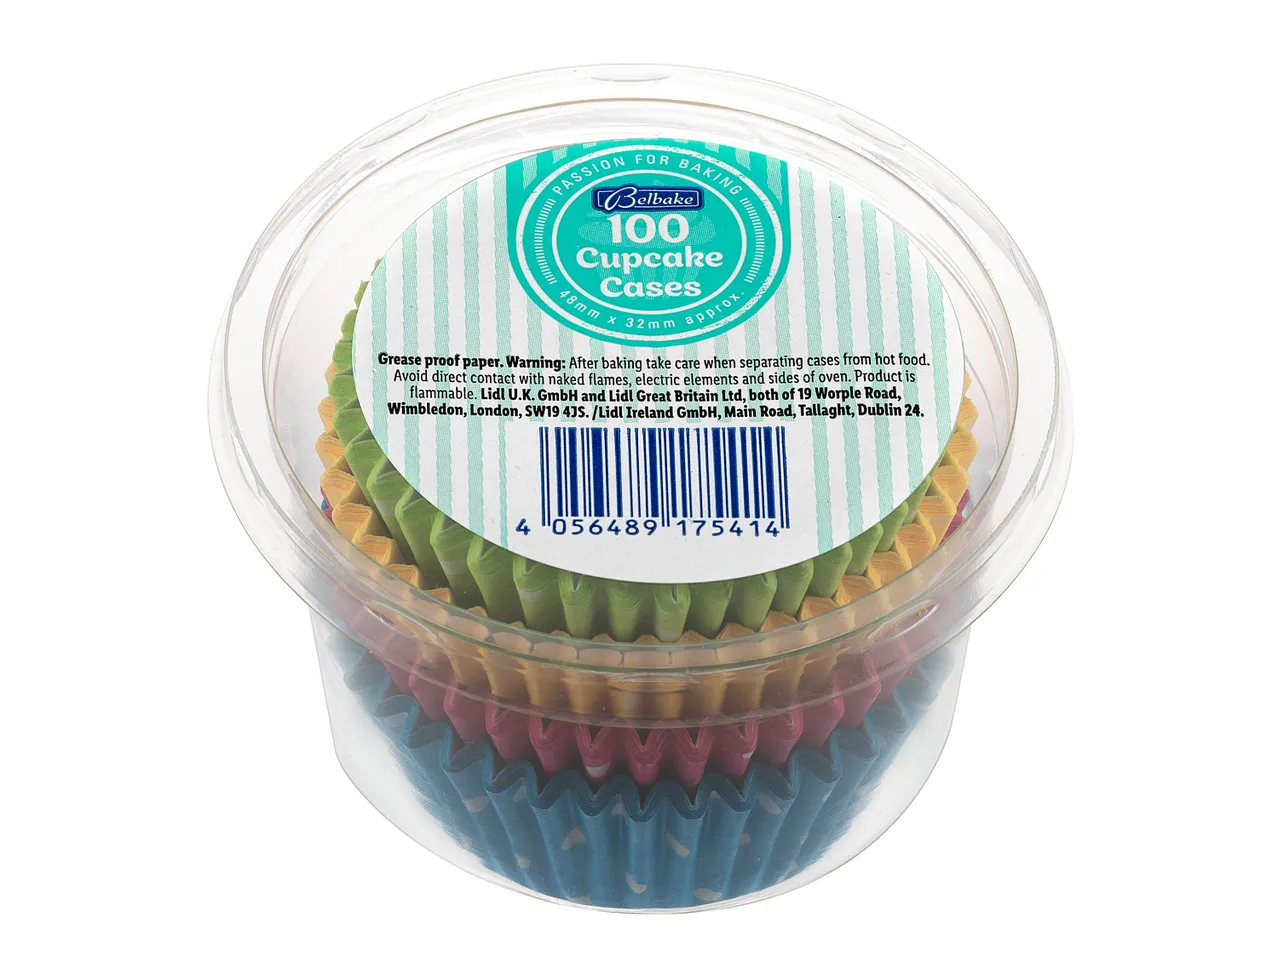 Go to full screen view: Belbake 100 Cupcake Cases - Image 2